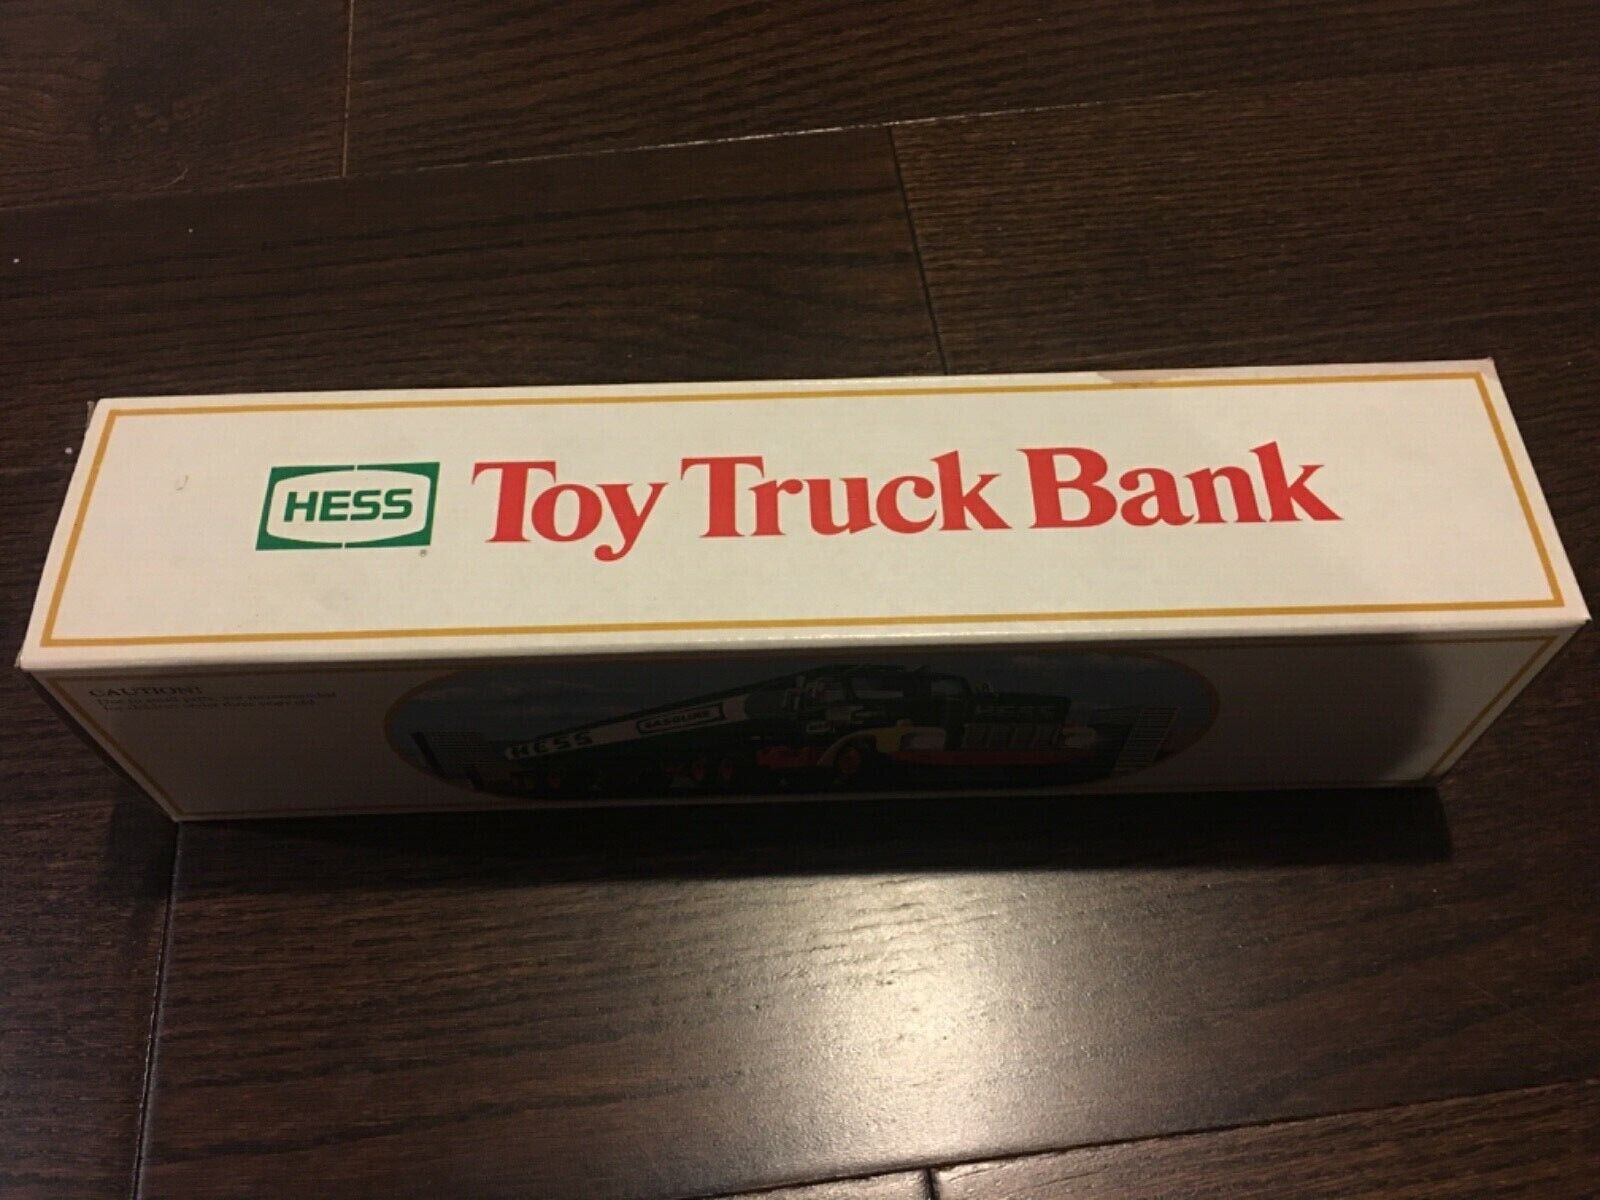 Hess Toy Truck Bank 1984 Hess Fuel Oils NEW Vintage 